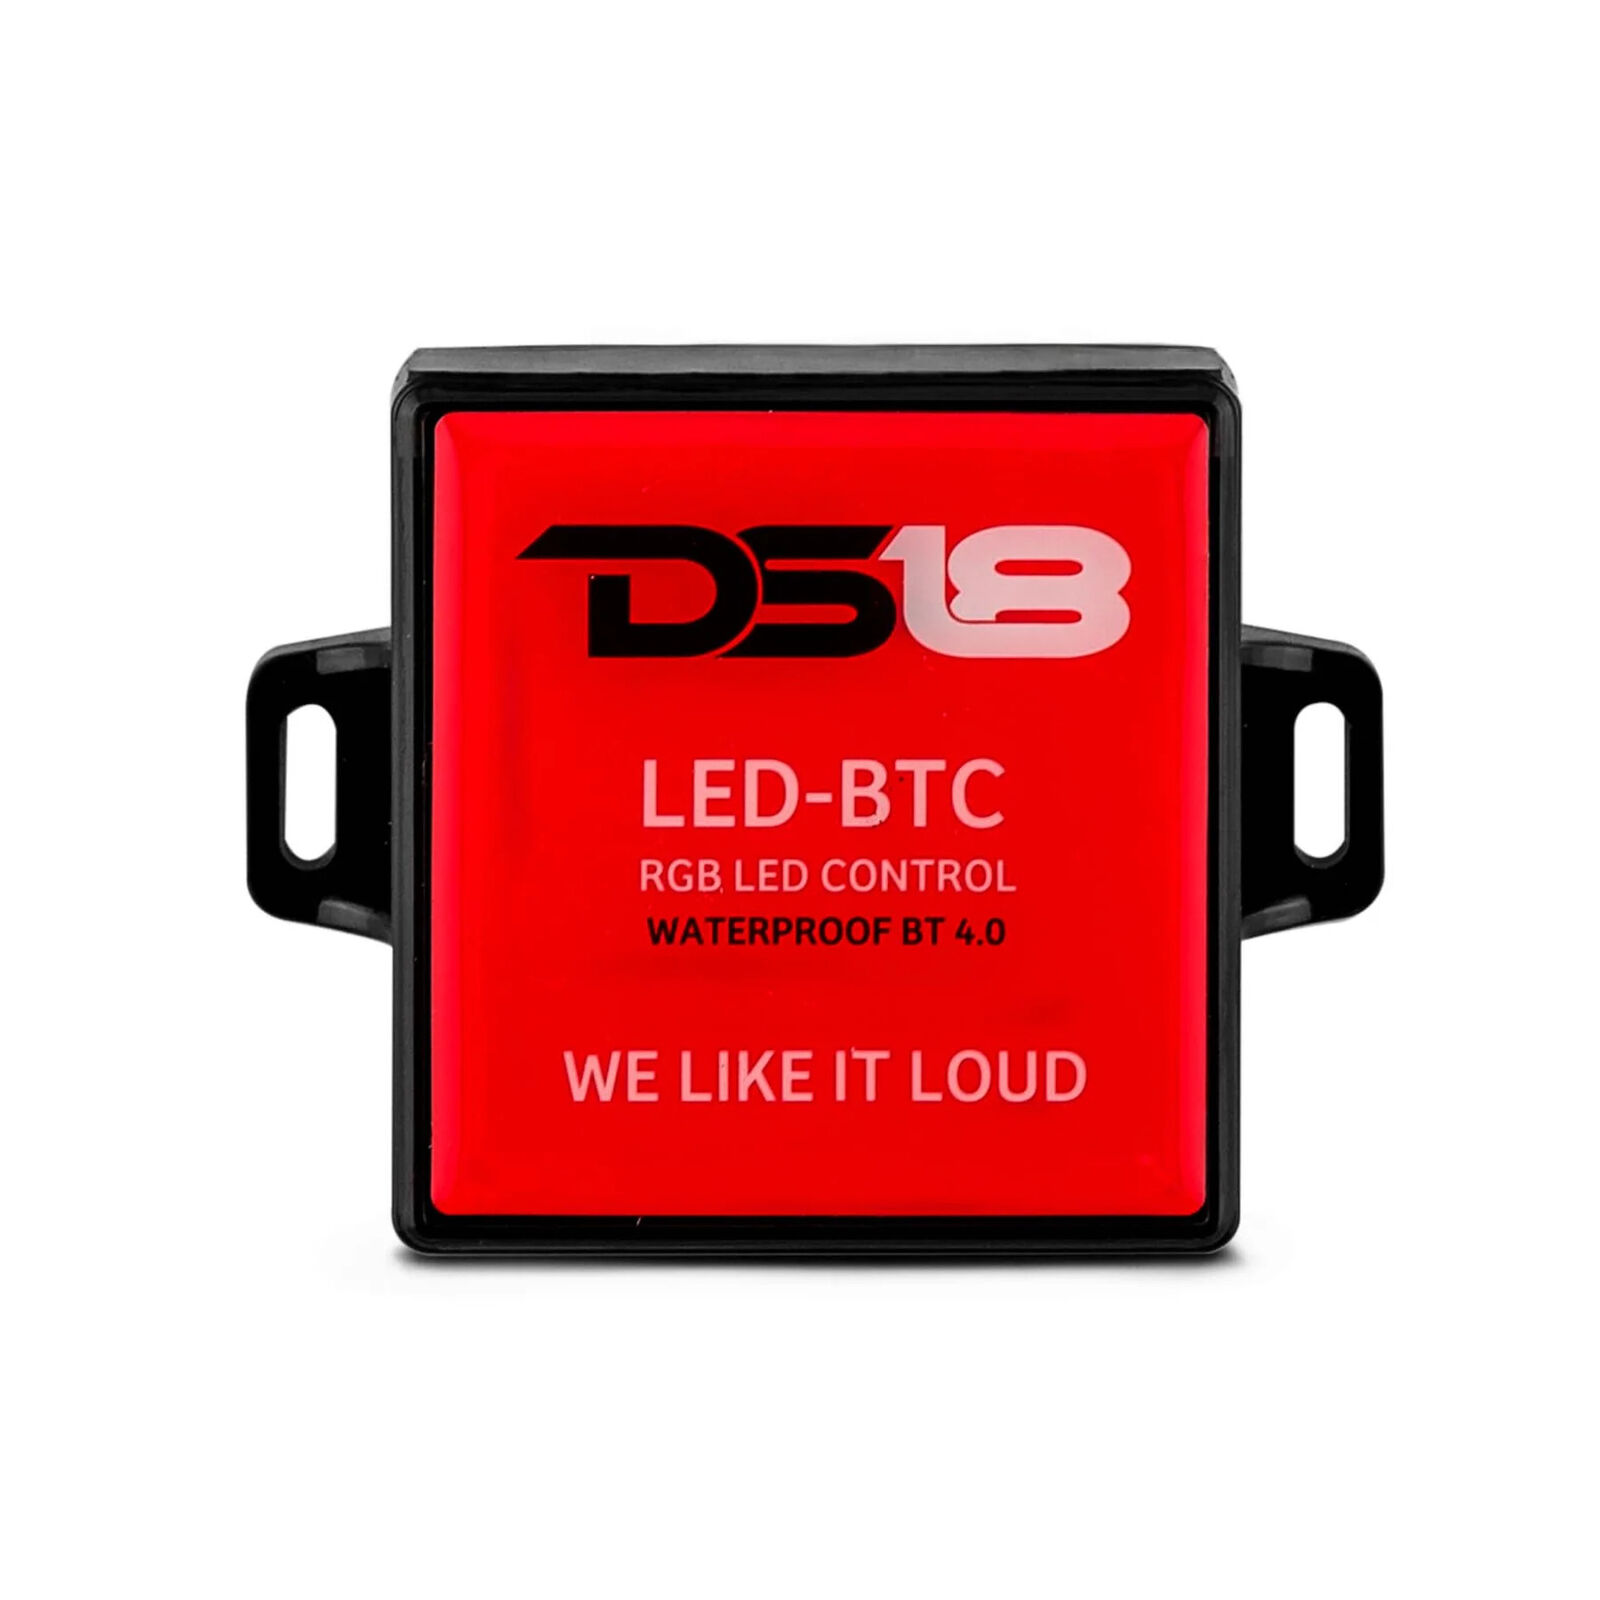 DS18 LED-BTC RGB LIGHT EMITTING DIODE BLUETOOTH 4.0 CONTROL FOR ANDROID & iPHONE